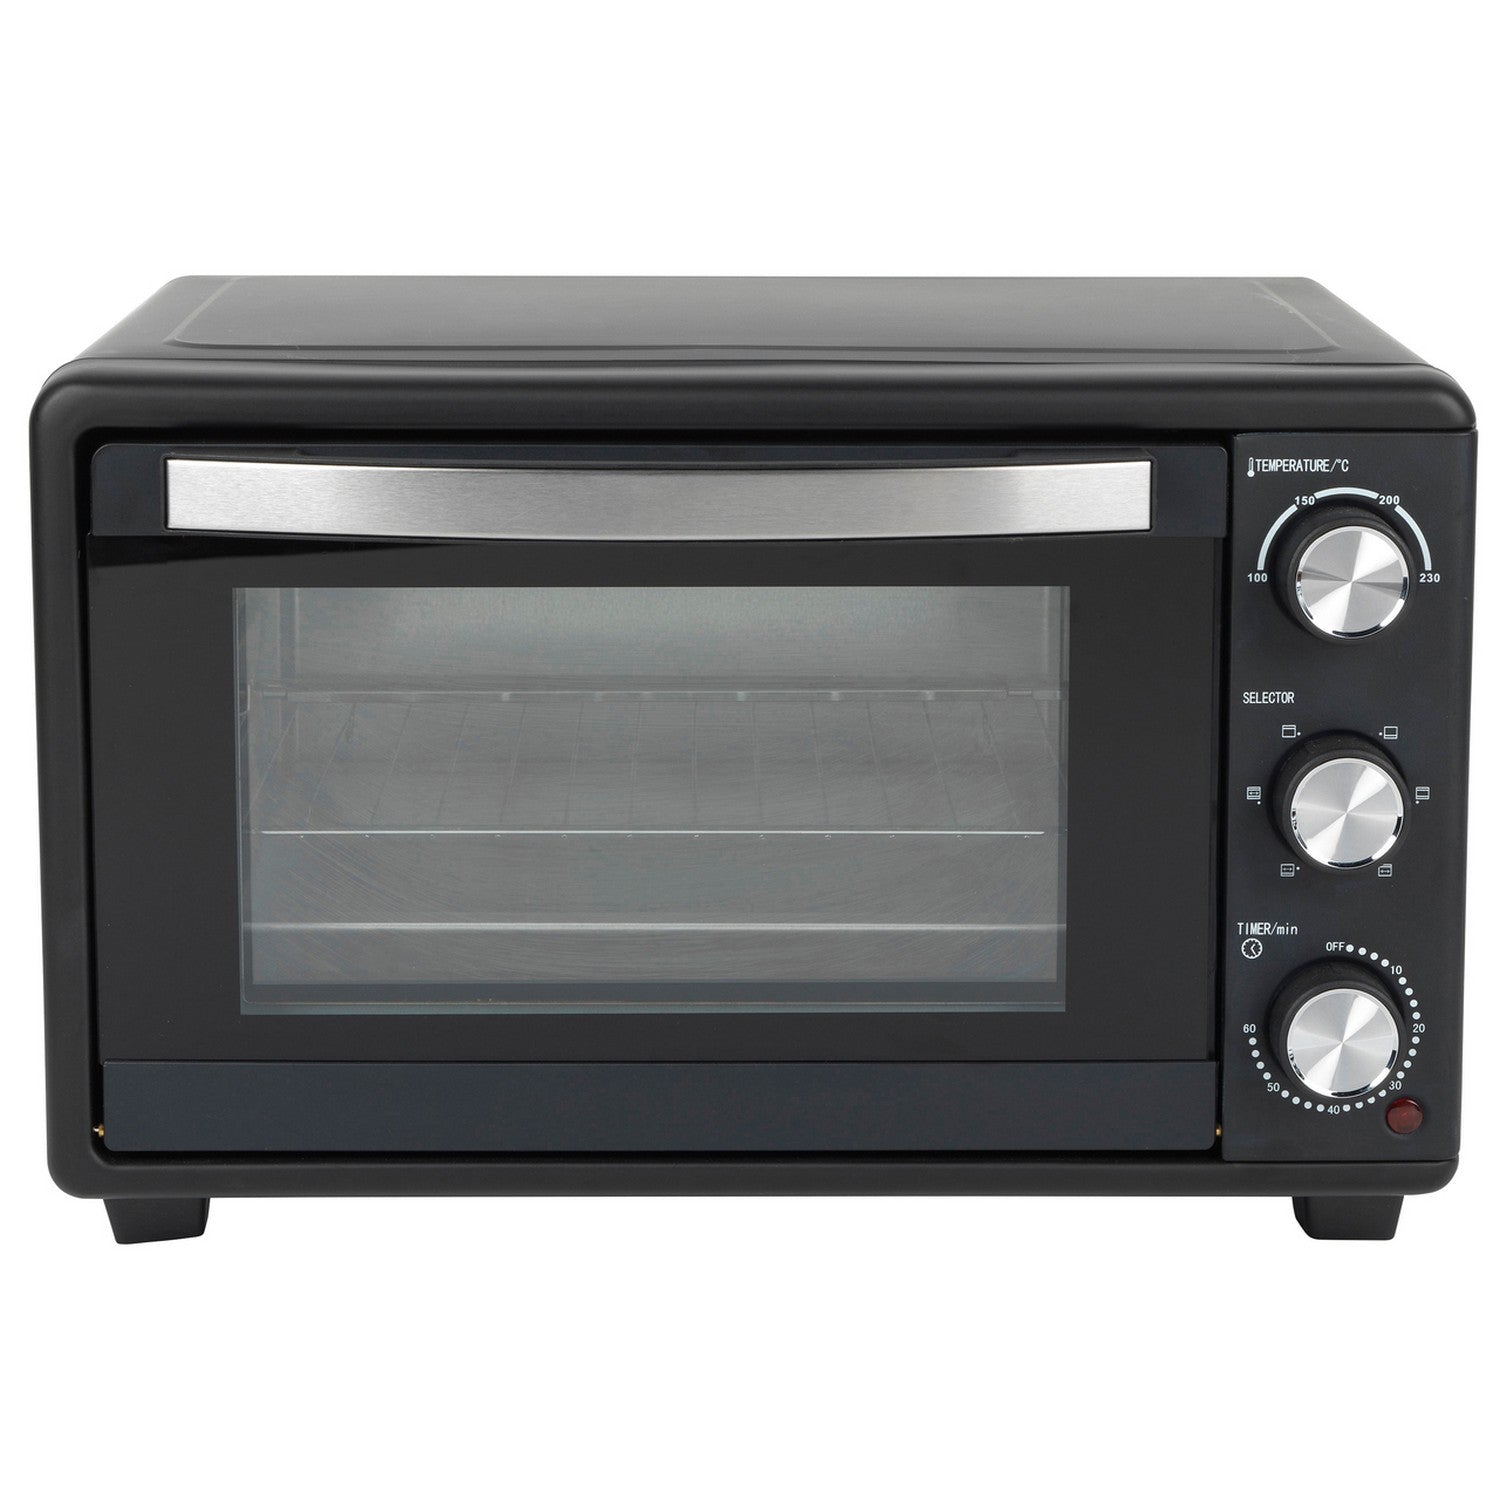 Salter 25 Litre Compact Mini Toaster Oven